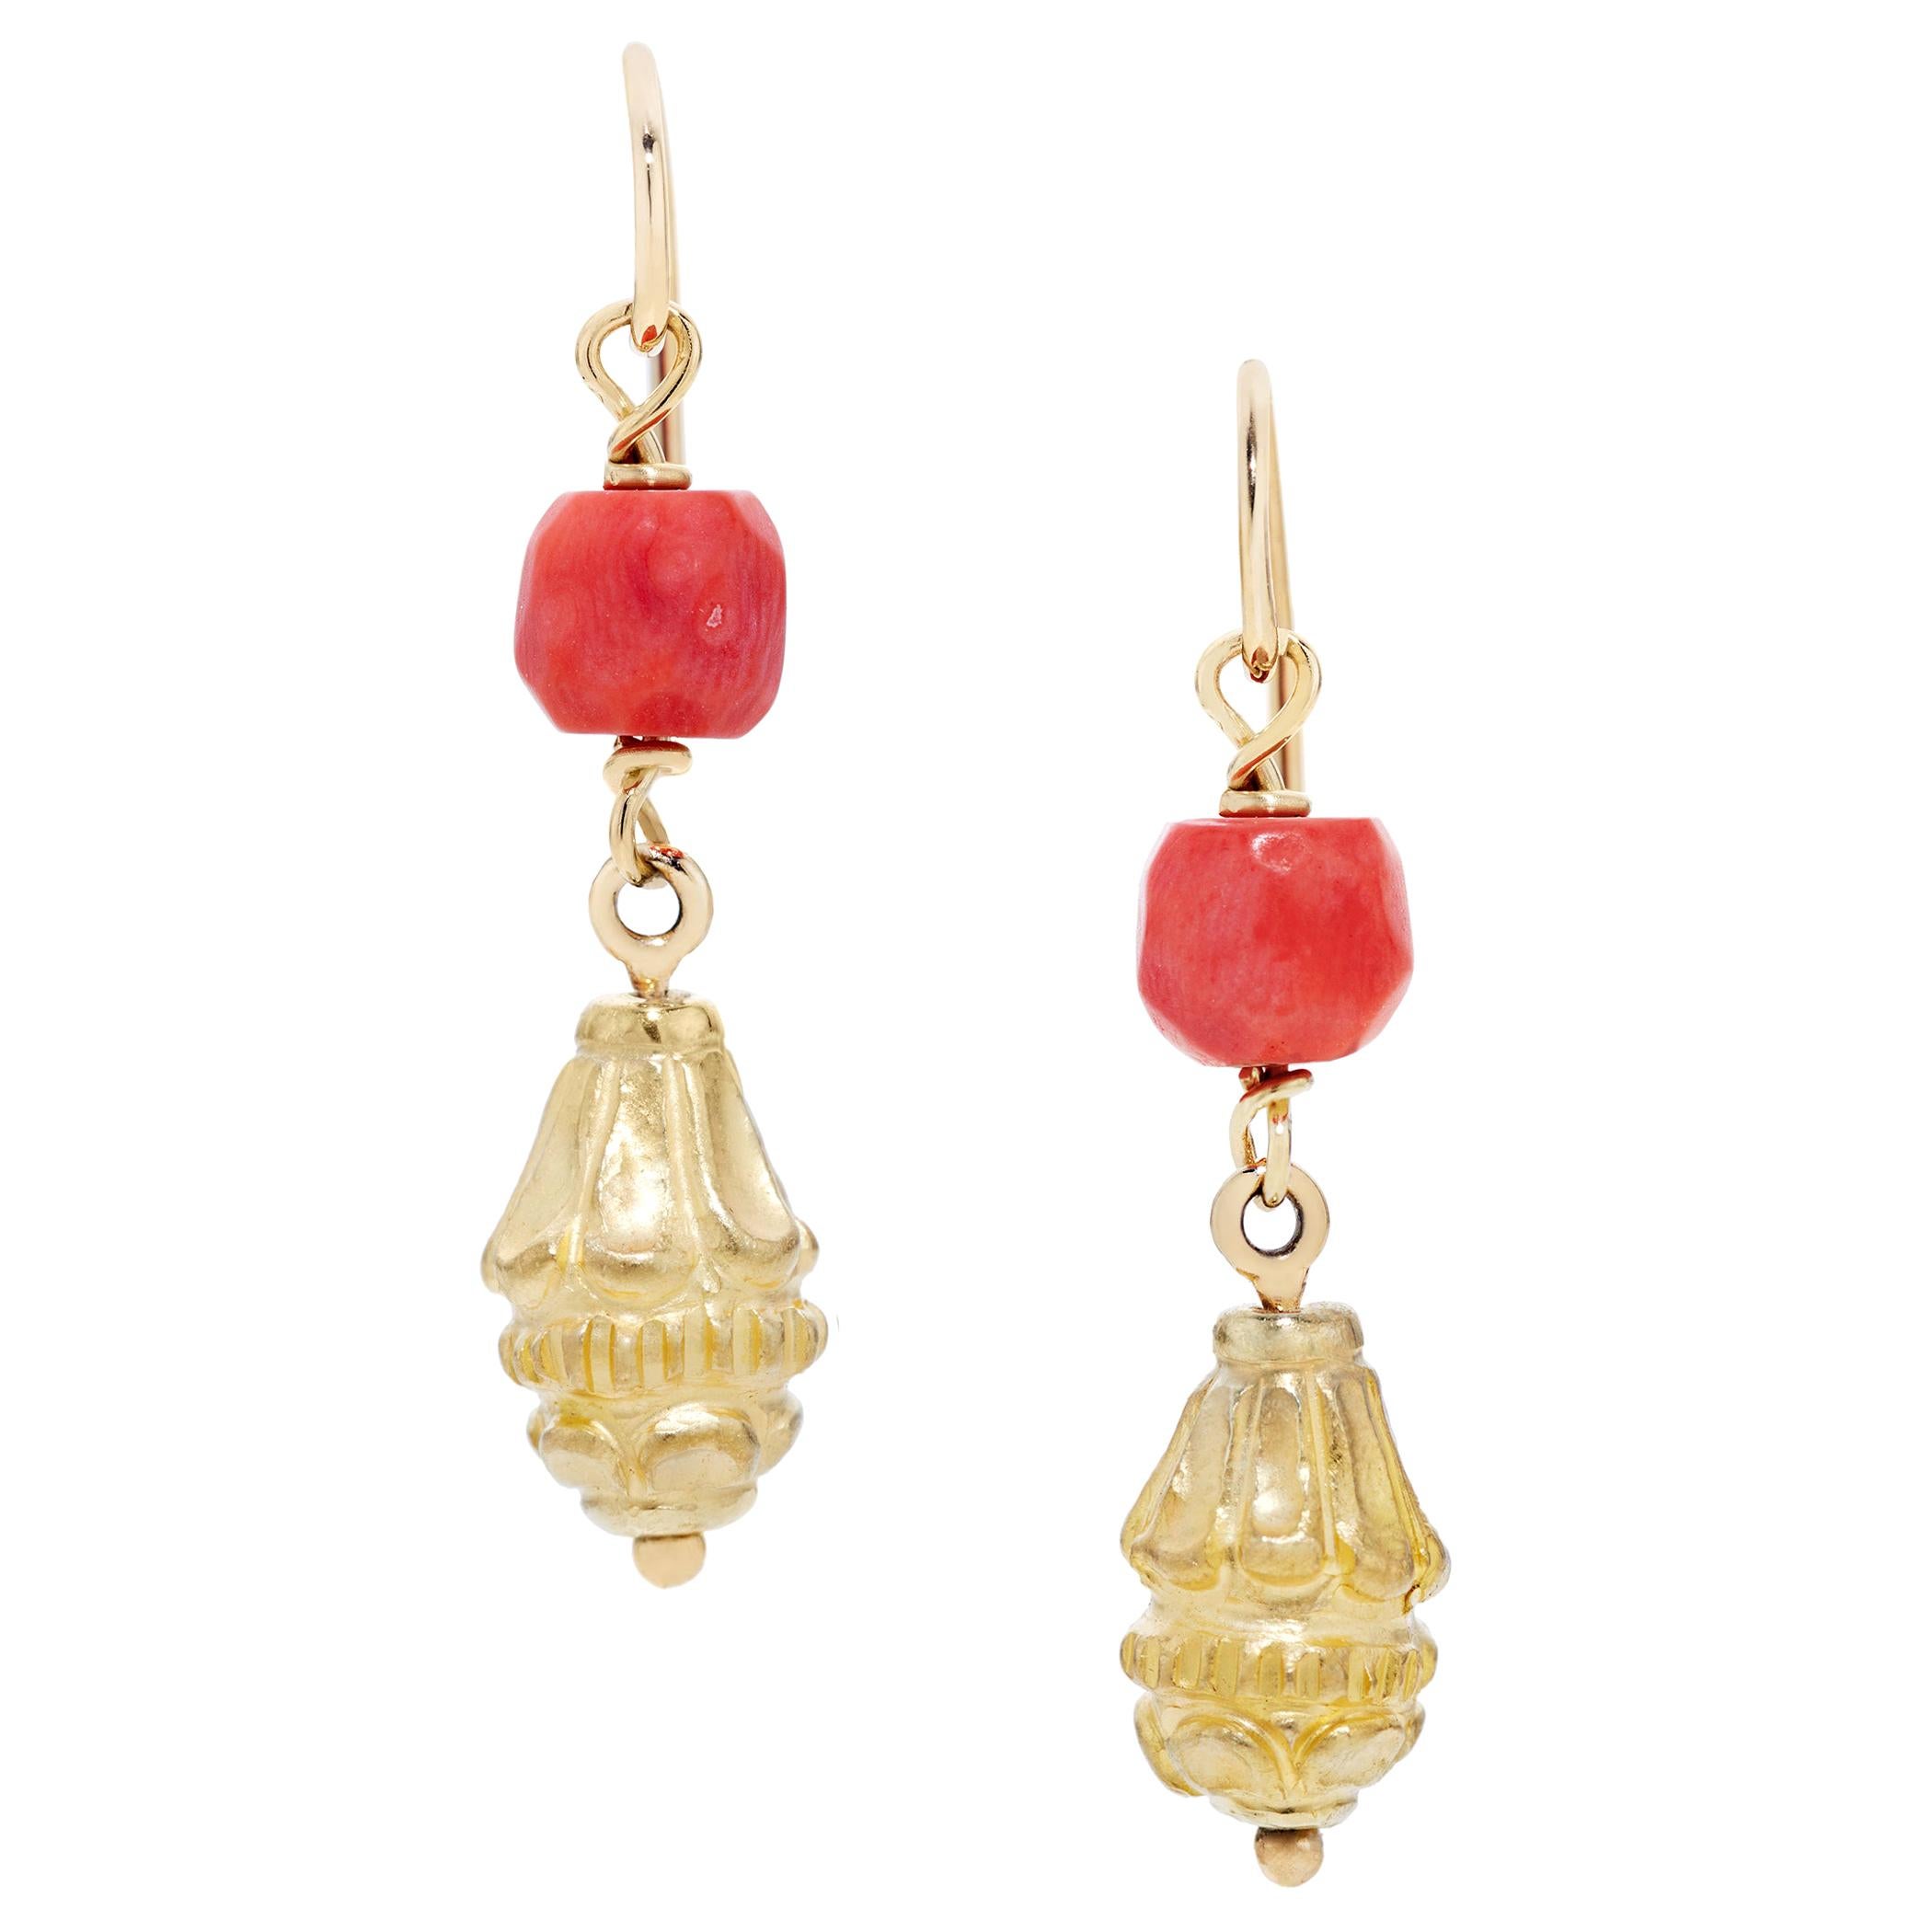 Vintage Sardinian Coral and Antique Egyptian Amulet Earrings in 22 & 18 Karat YG